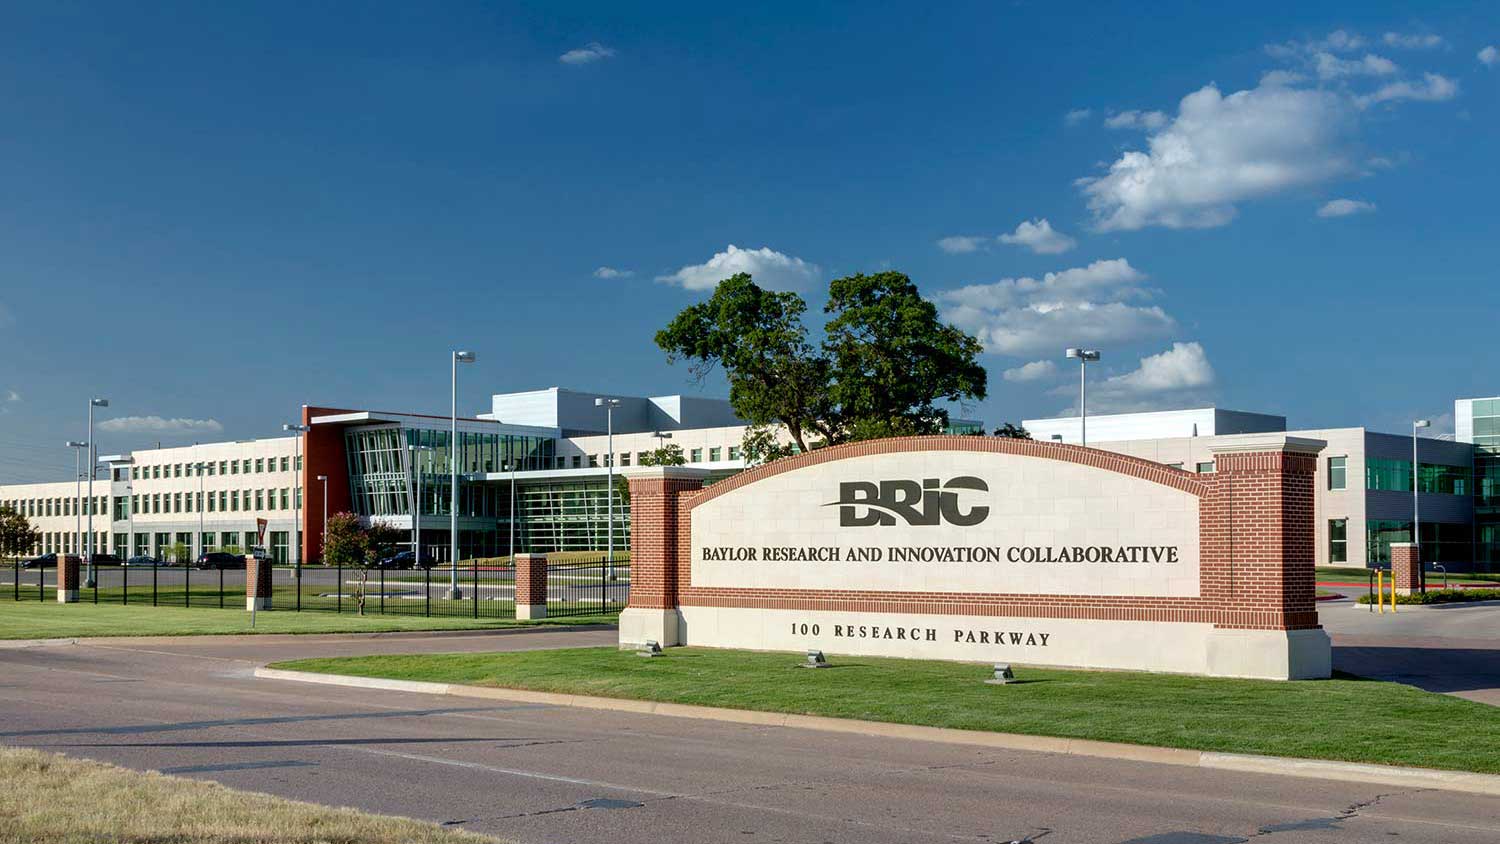 Baylor Research and Innovation Collaborative (BRIC)